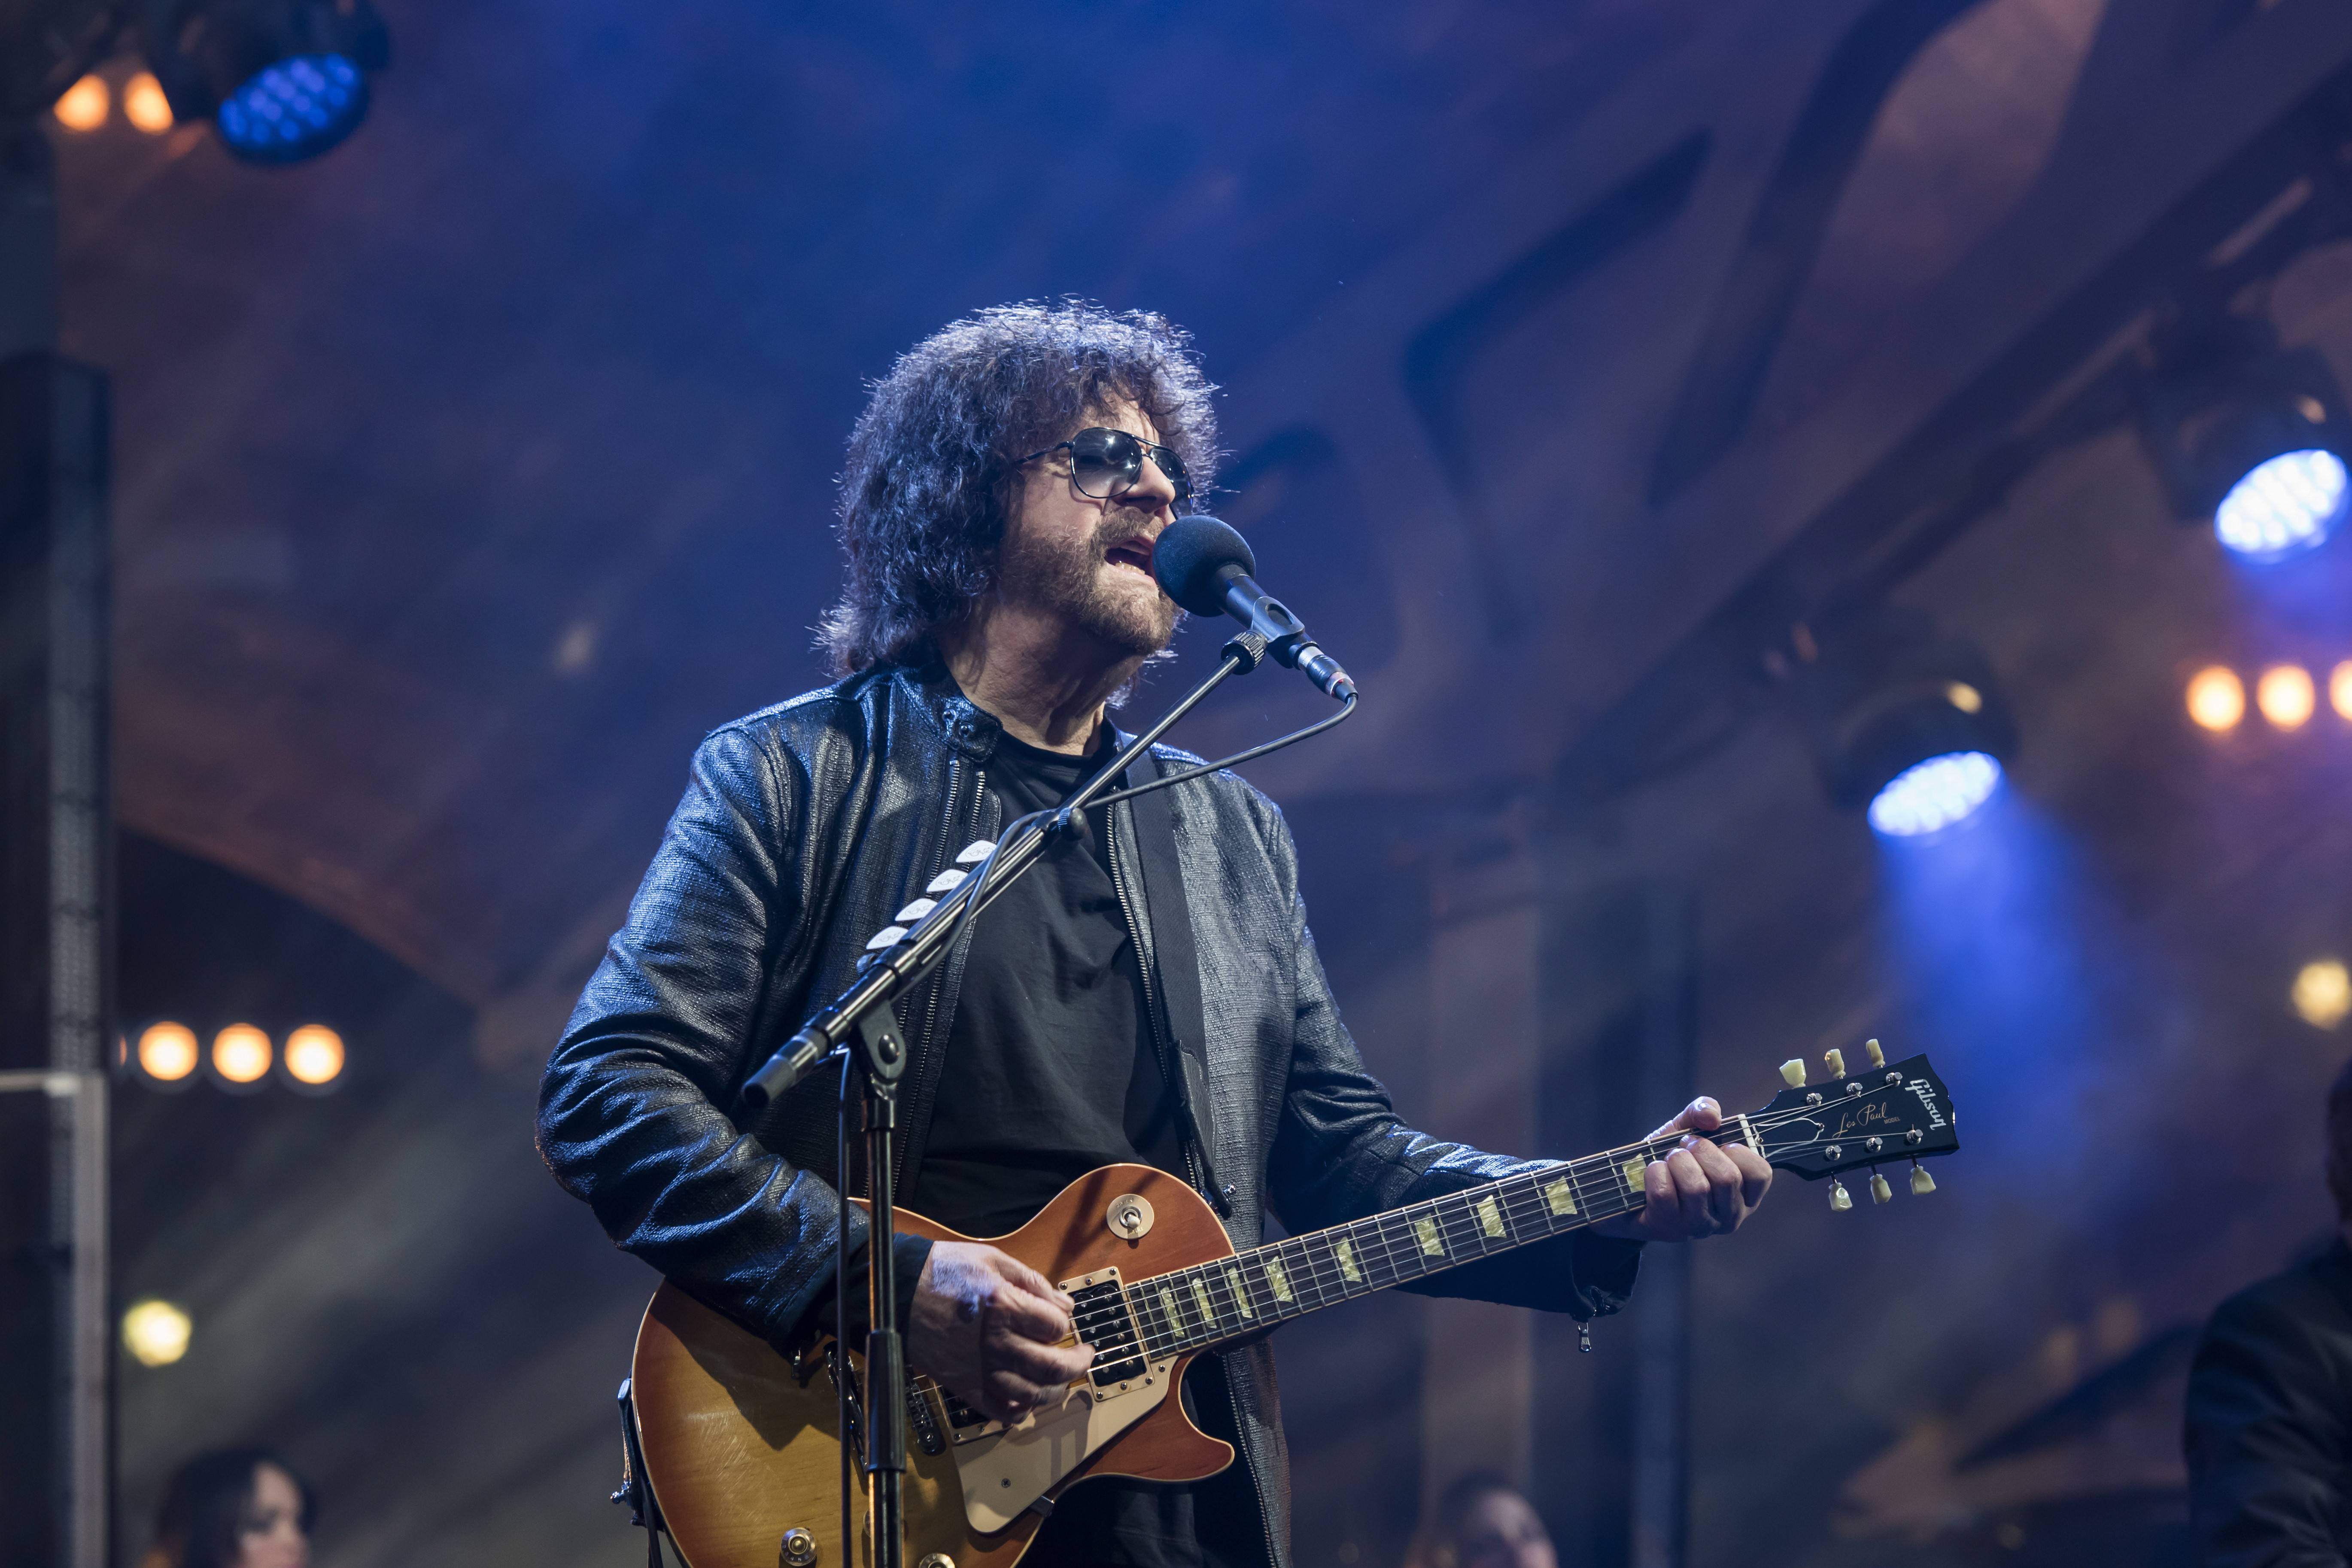 Announcement JEFF LYNNE’S ELO ANNOUNCE 2018 ARENA TOUR KICKING OFF